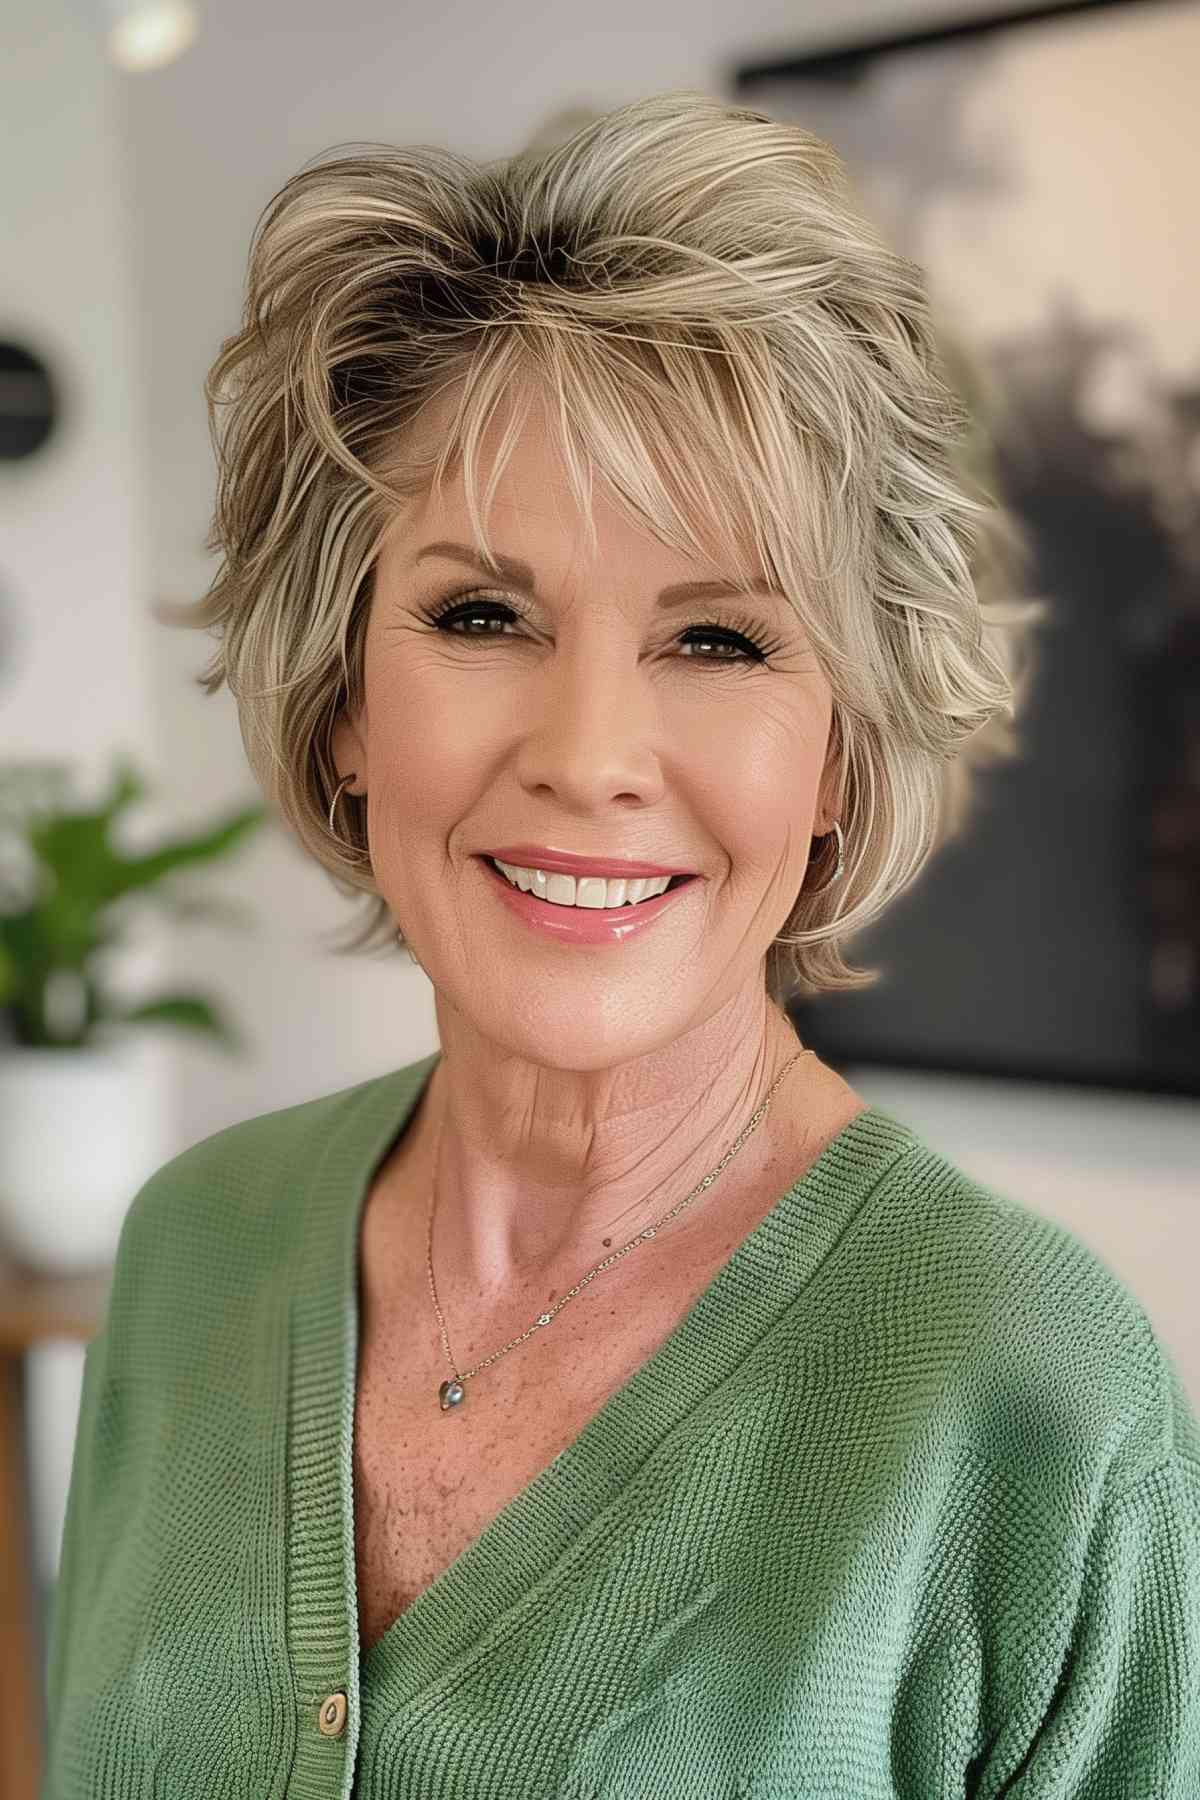 A woman with a short, stylish haircut featuring textured waves and a silver-grey hue.